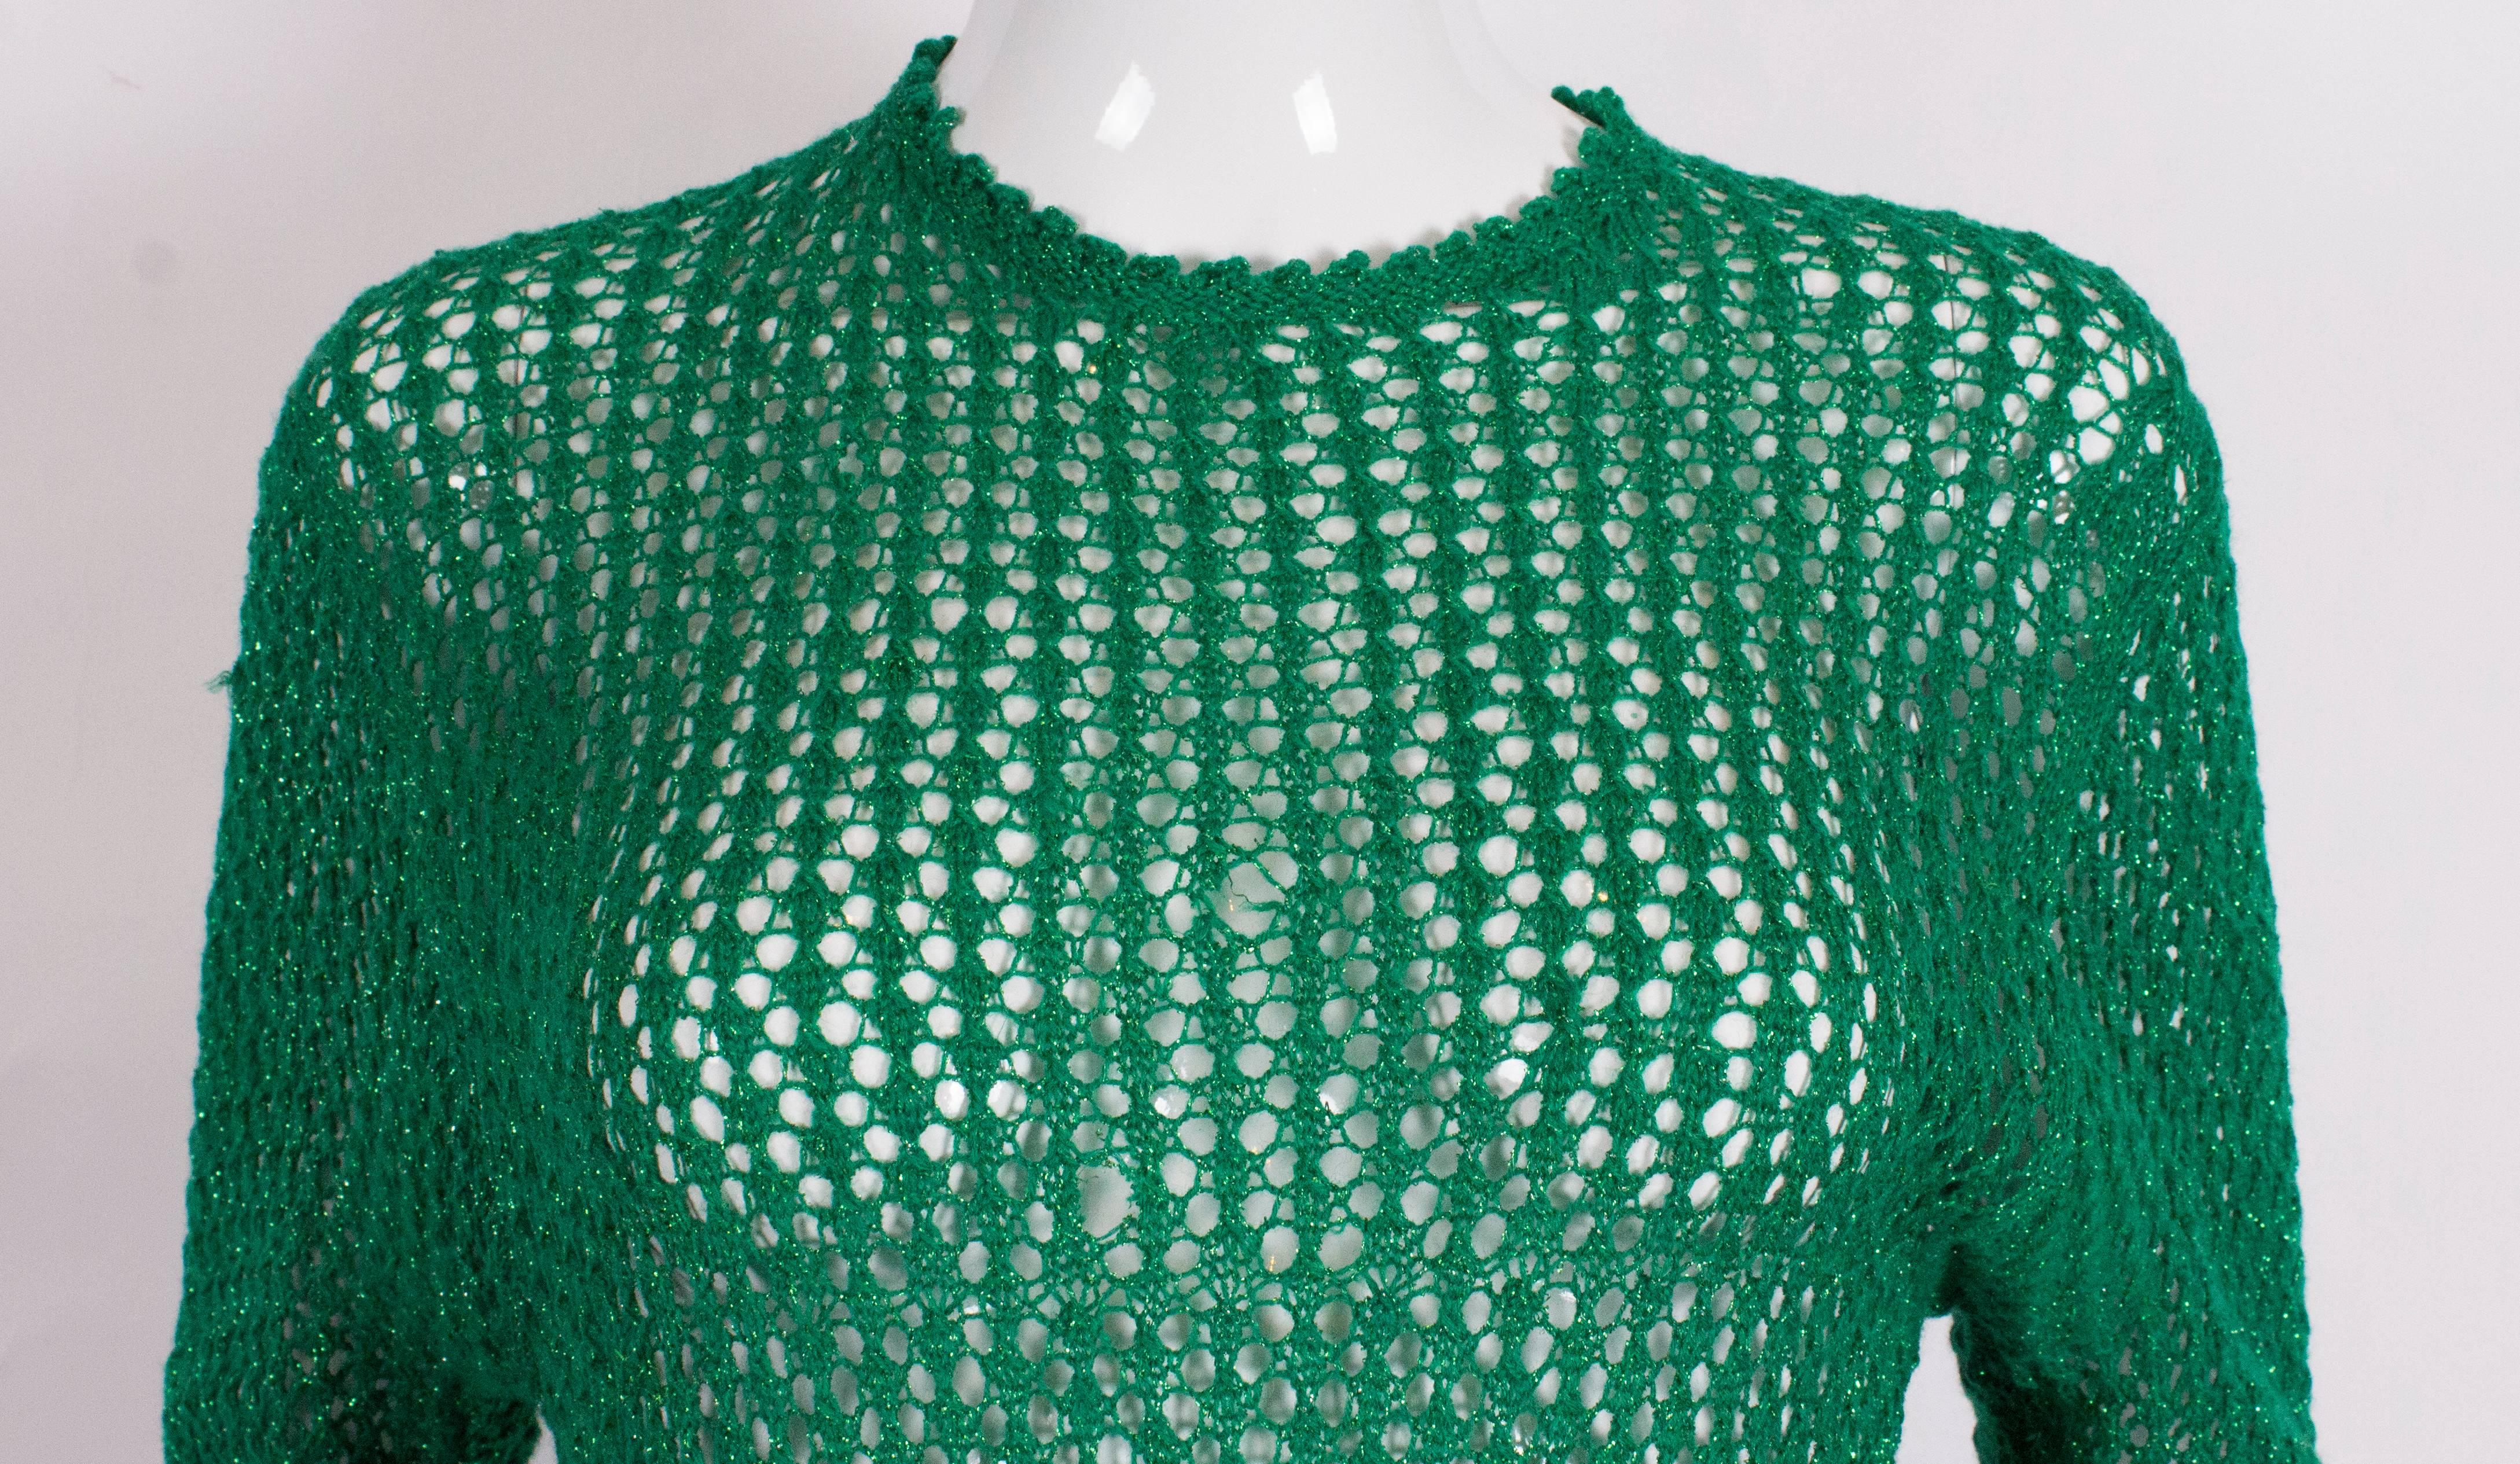 A Sparkly Green Knitted Crochet Dress 1